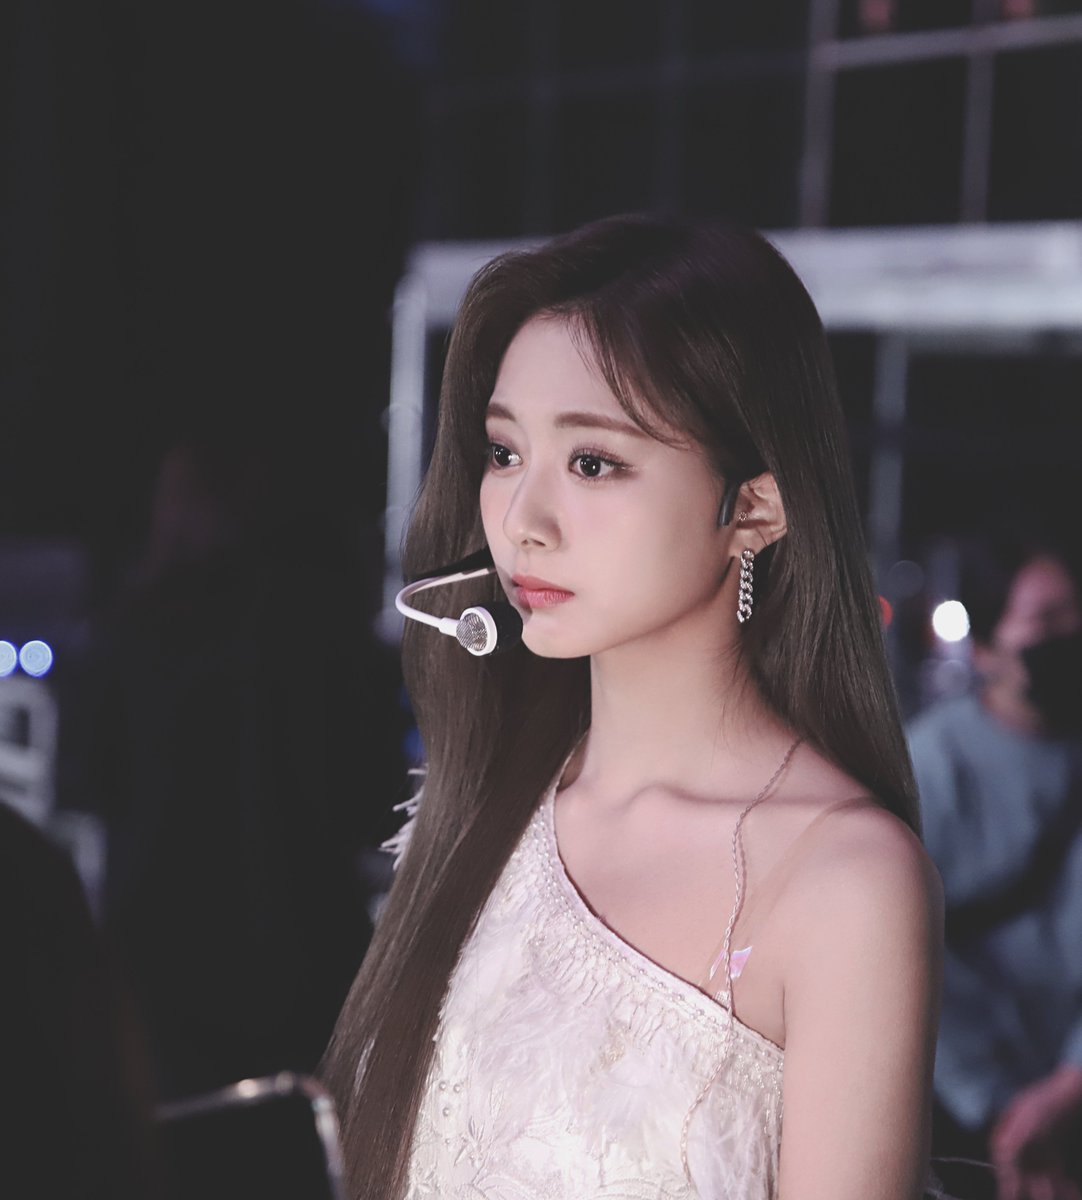 Save the best for last. Dropping this photo here as the closing for this thread. For more shots, you can check the lastest episode from TWICE POST or simply, click the link below. <3[ http://naver.me/F5uSSNAo ]